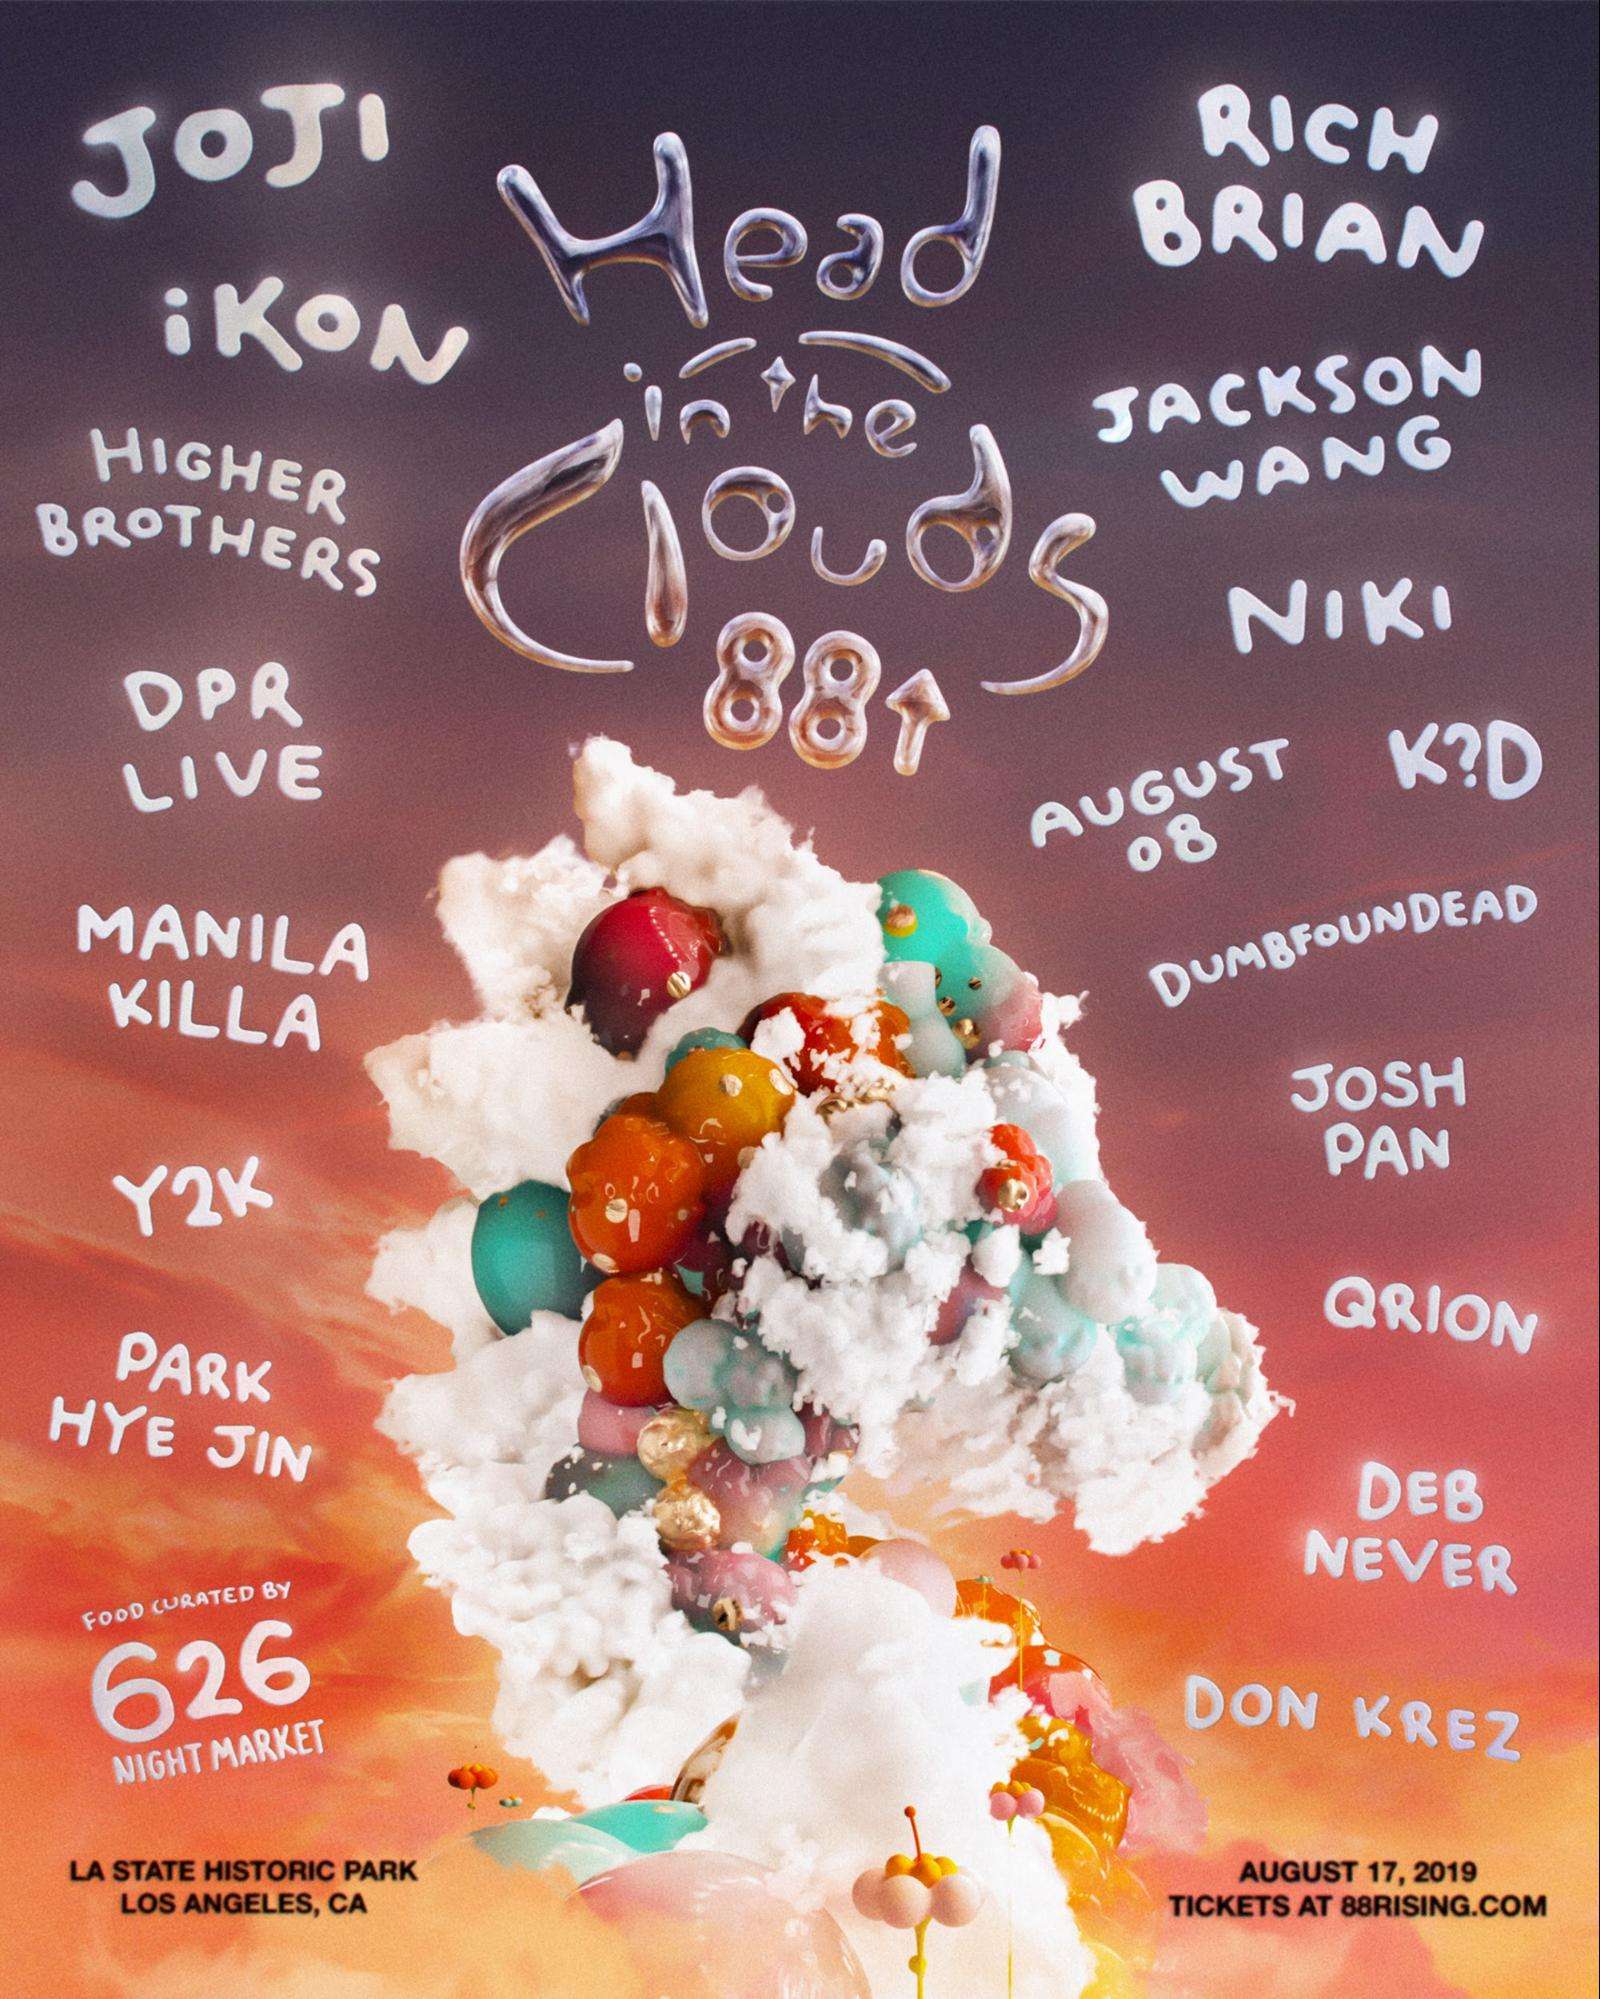 88rising 'Head In The Clouds' Festival Announces Full Lineup & AllNew